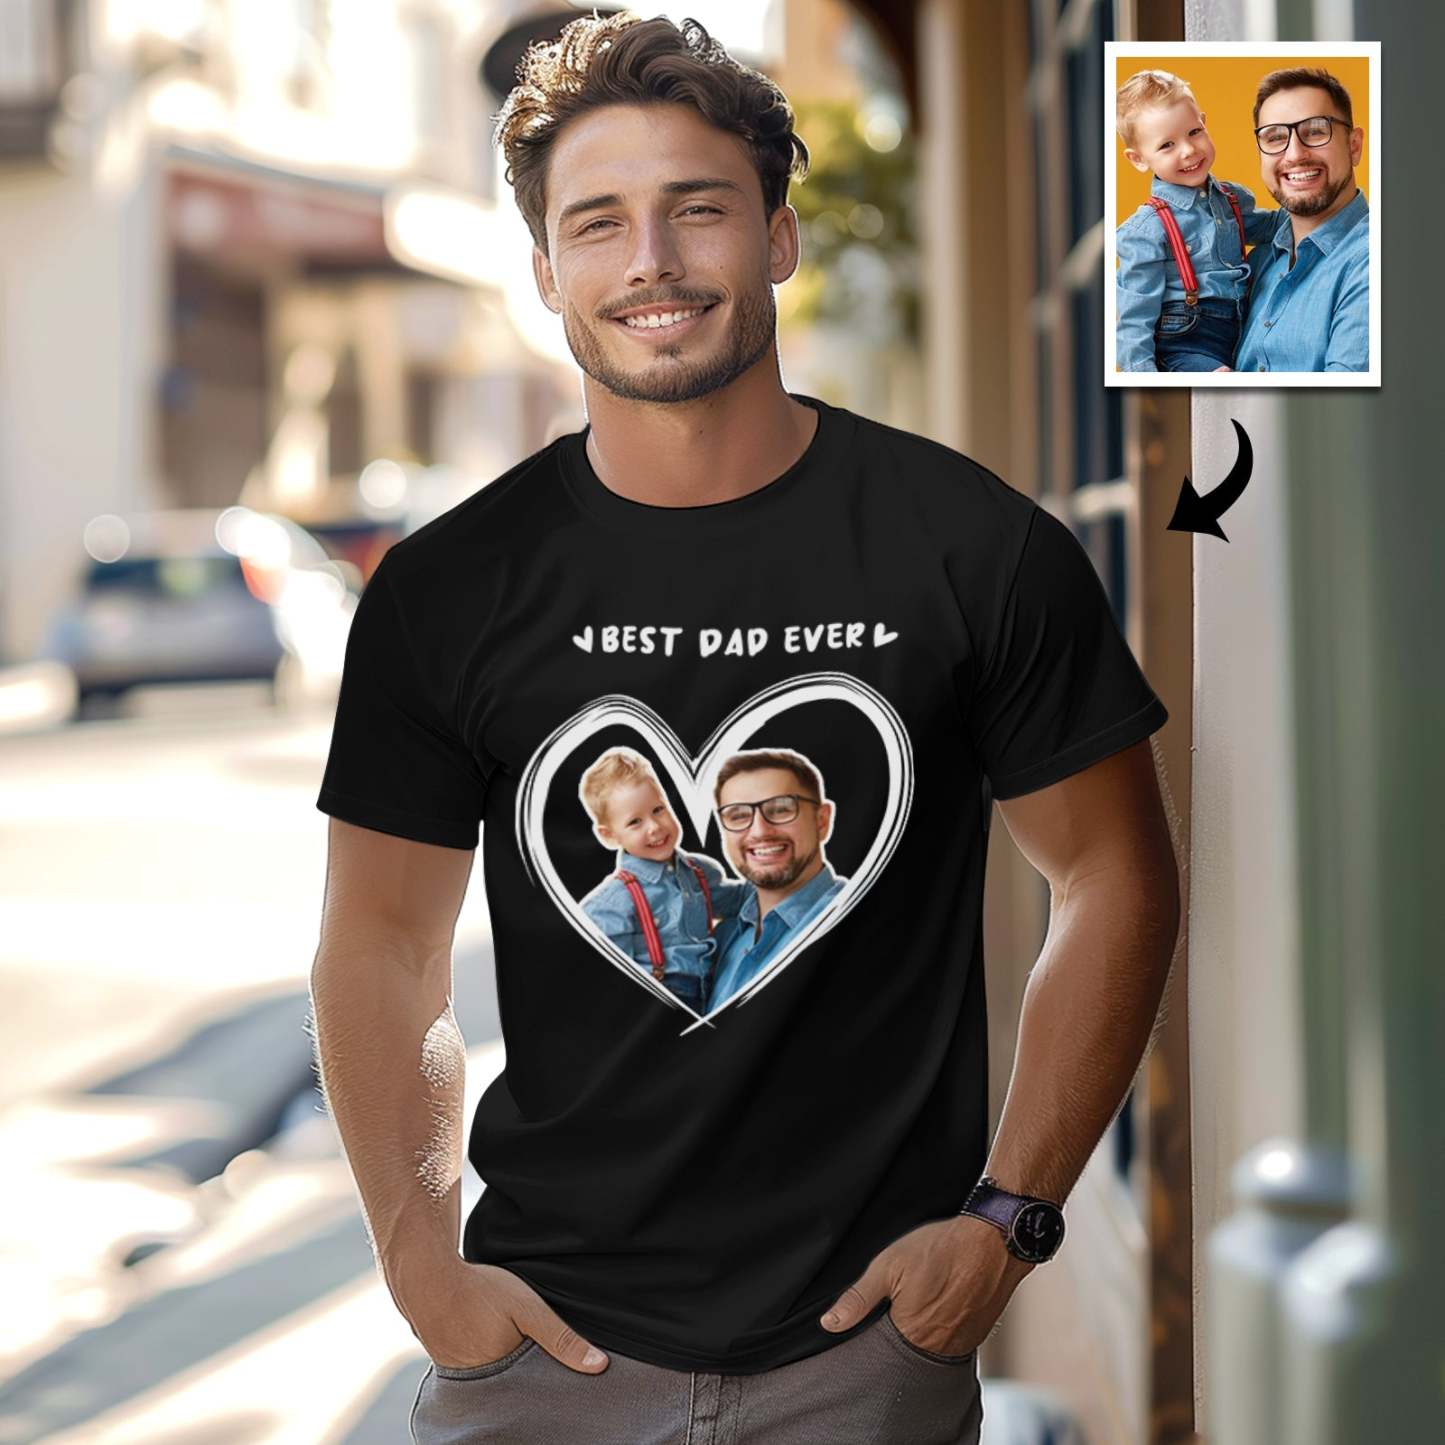 Custom Photo T-Shirt With Best Dad Ever Personalized Photo Men's T-Shirts Father's Day Gifts - GetPhotoSocksUk